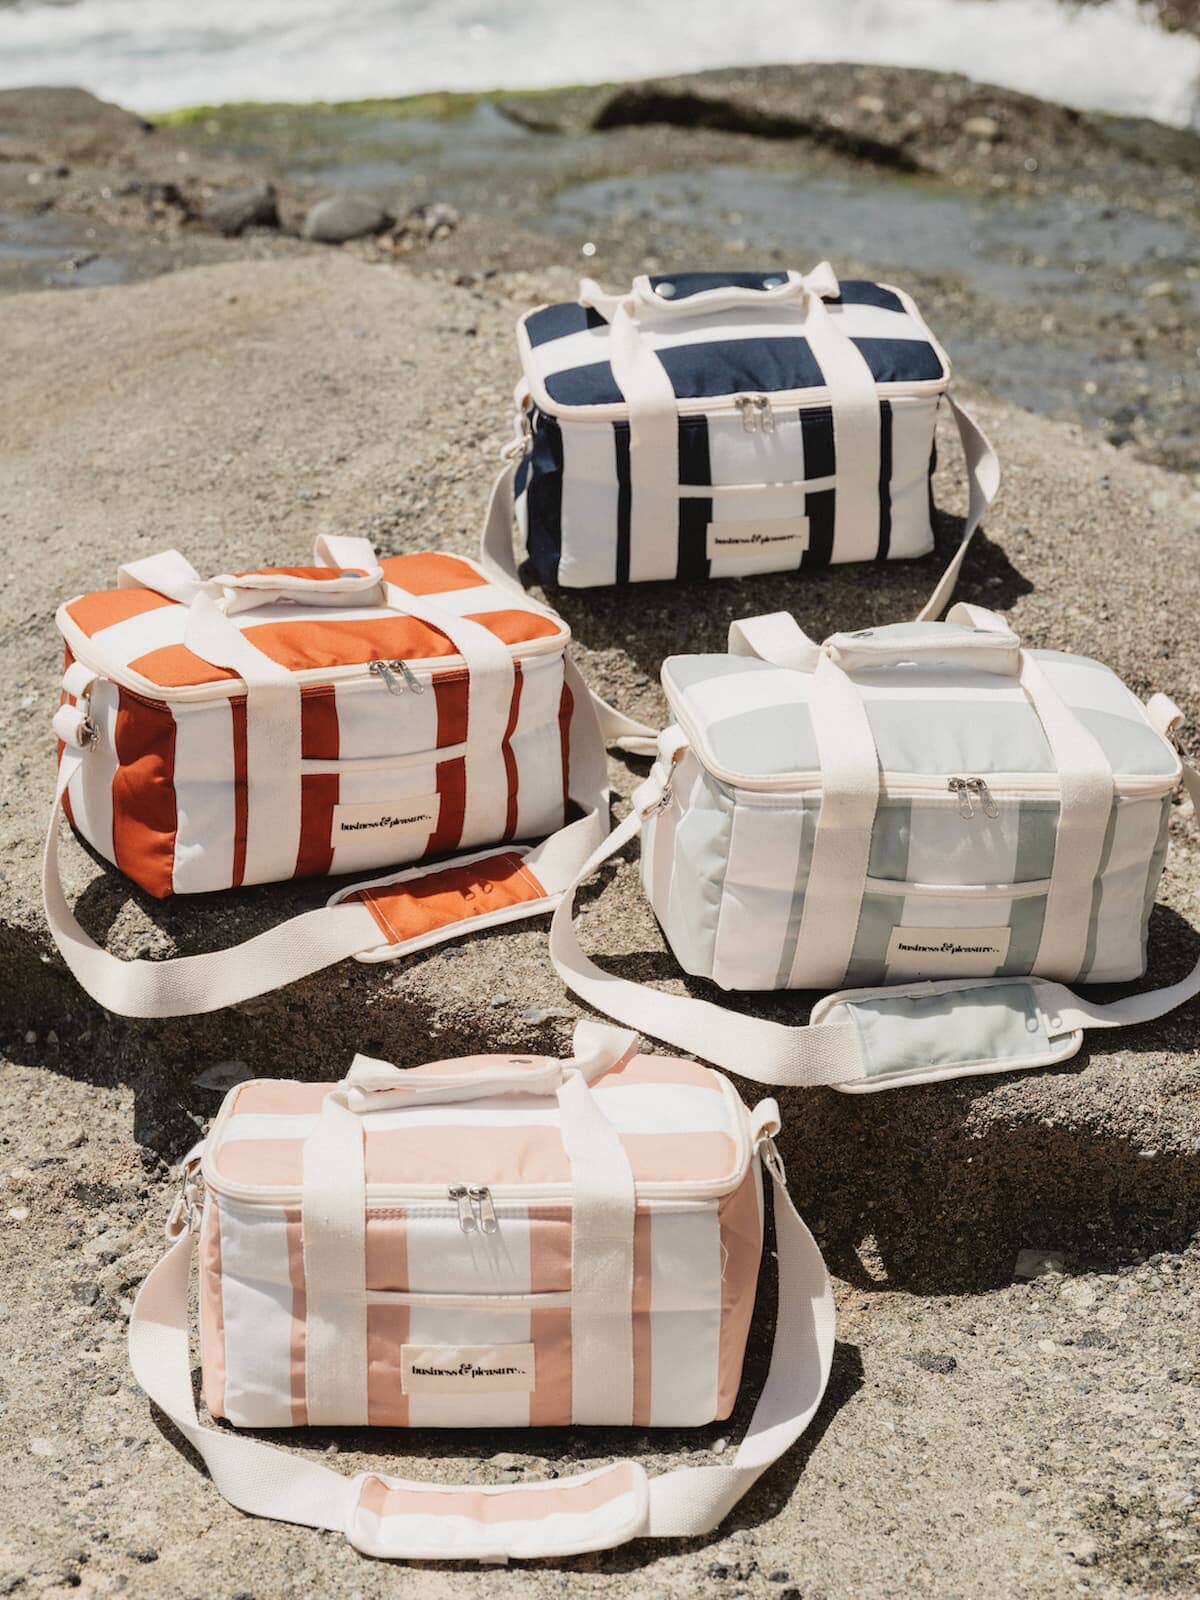 4 holiday cooler bags on the rocks at the beach